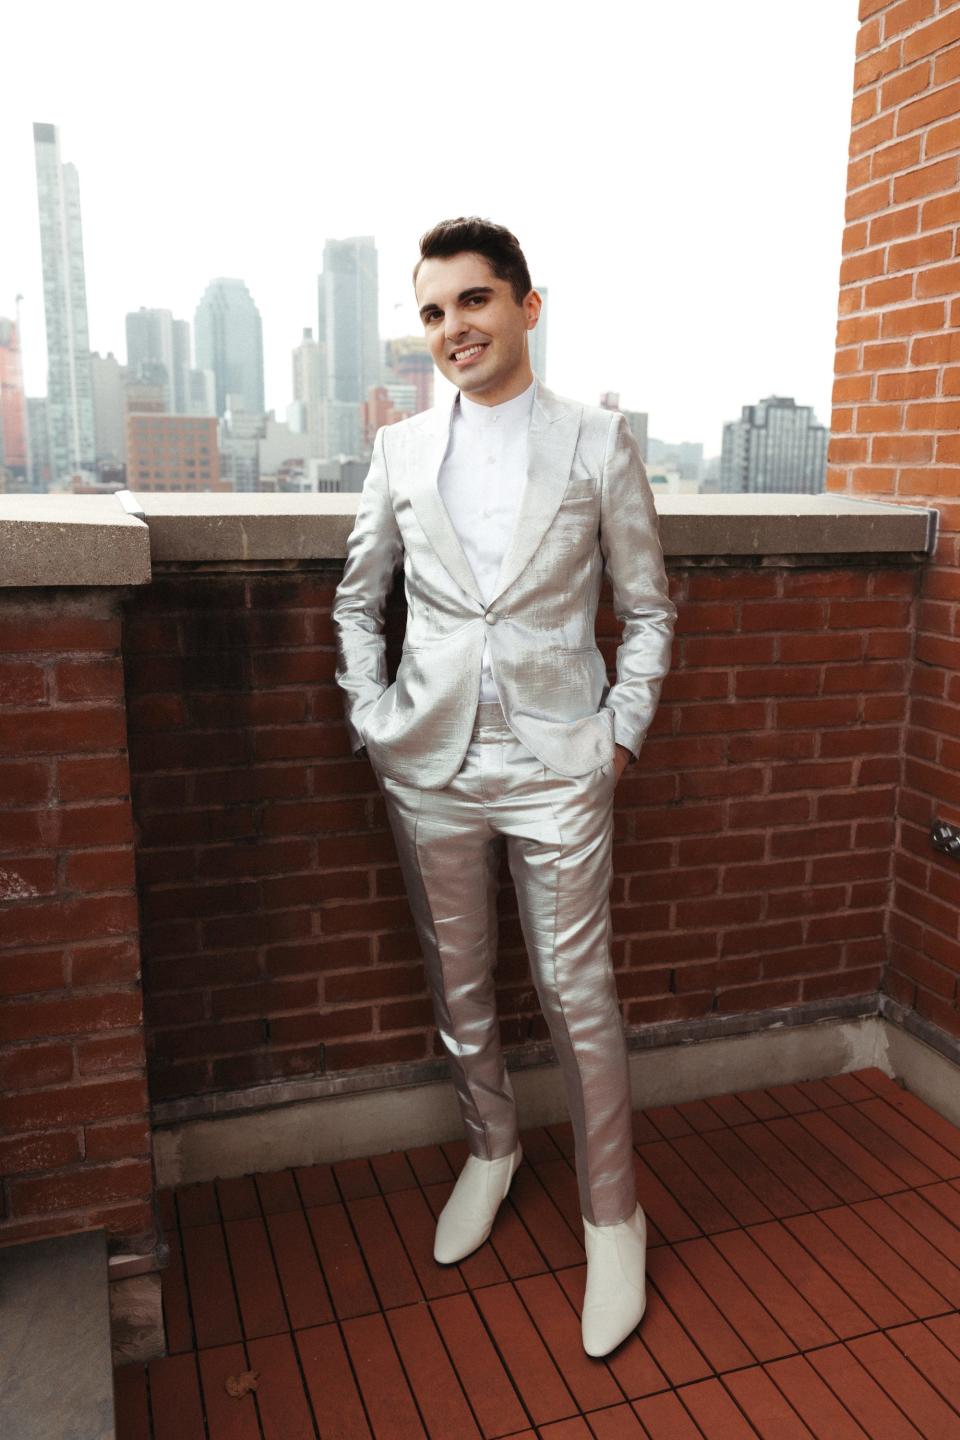 A man in a silver suit and white shoes stands on a brick balcony.